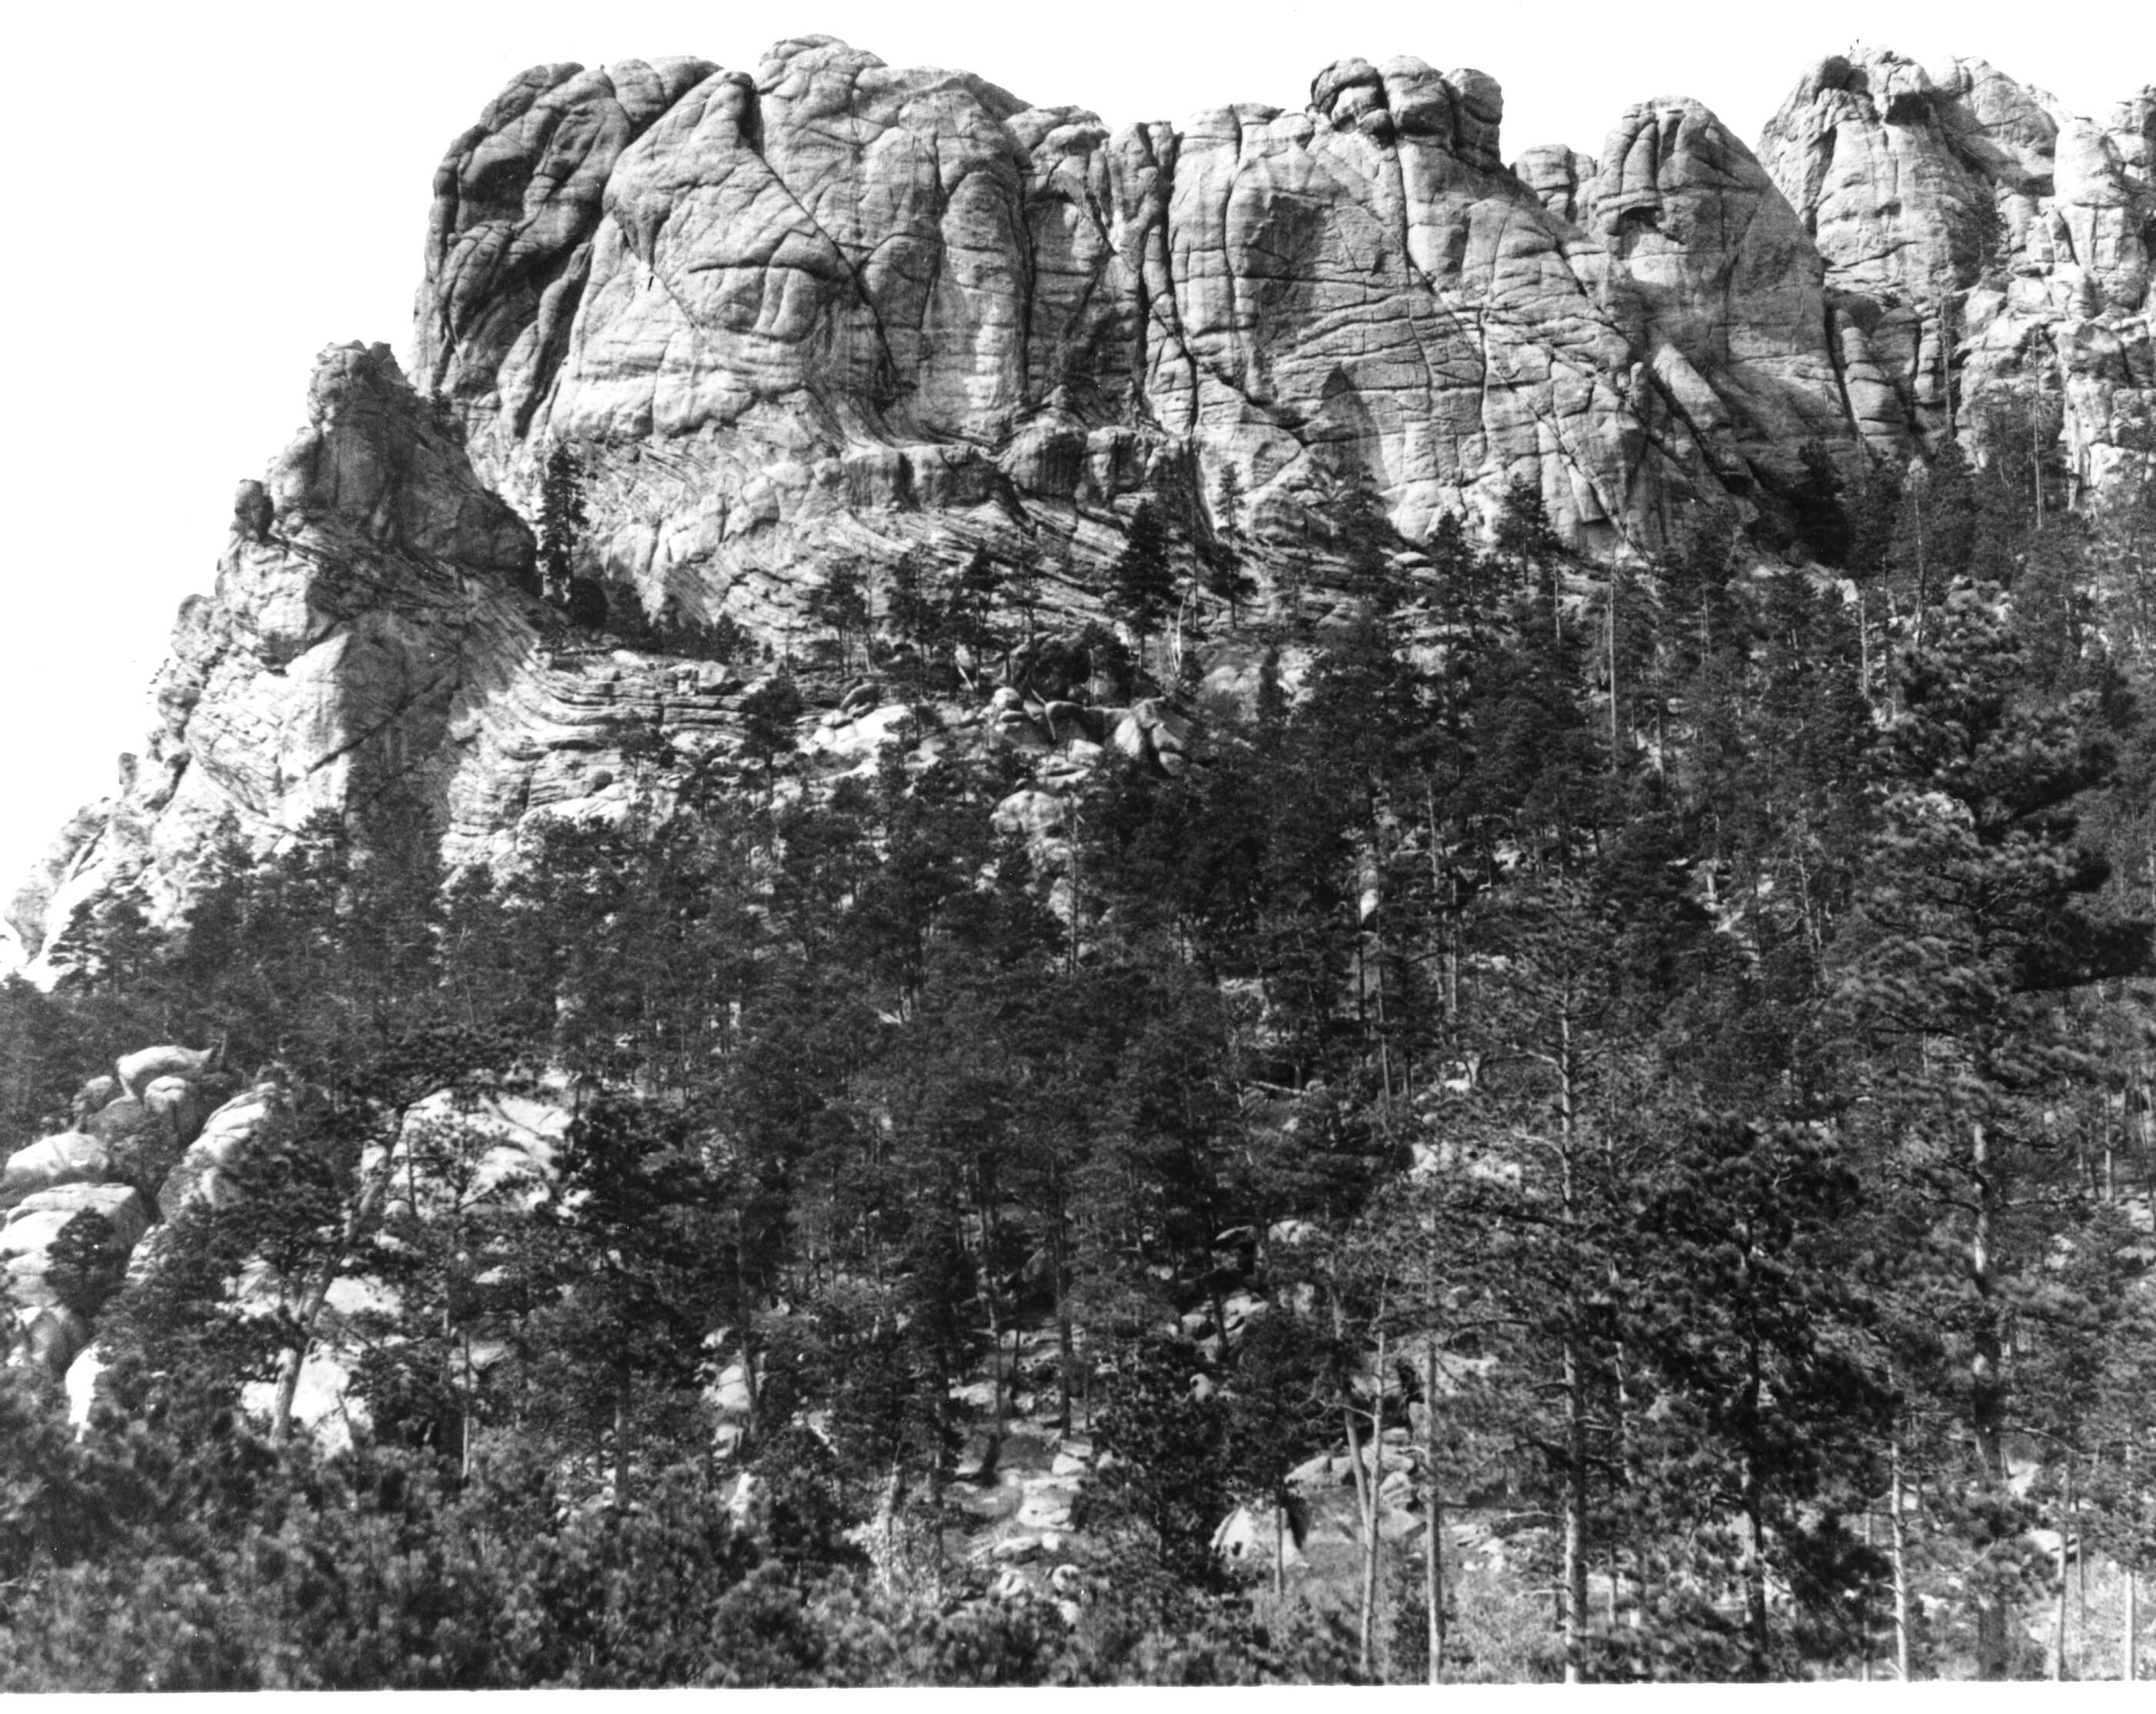 Mount Rushmore before carving